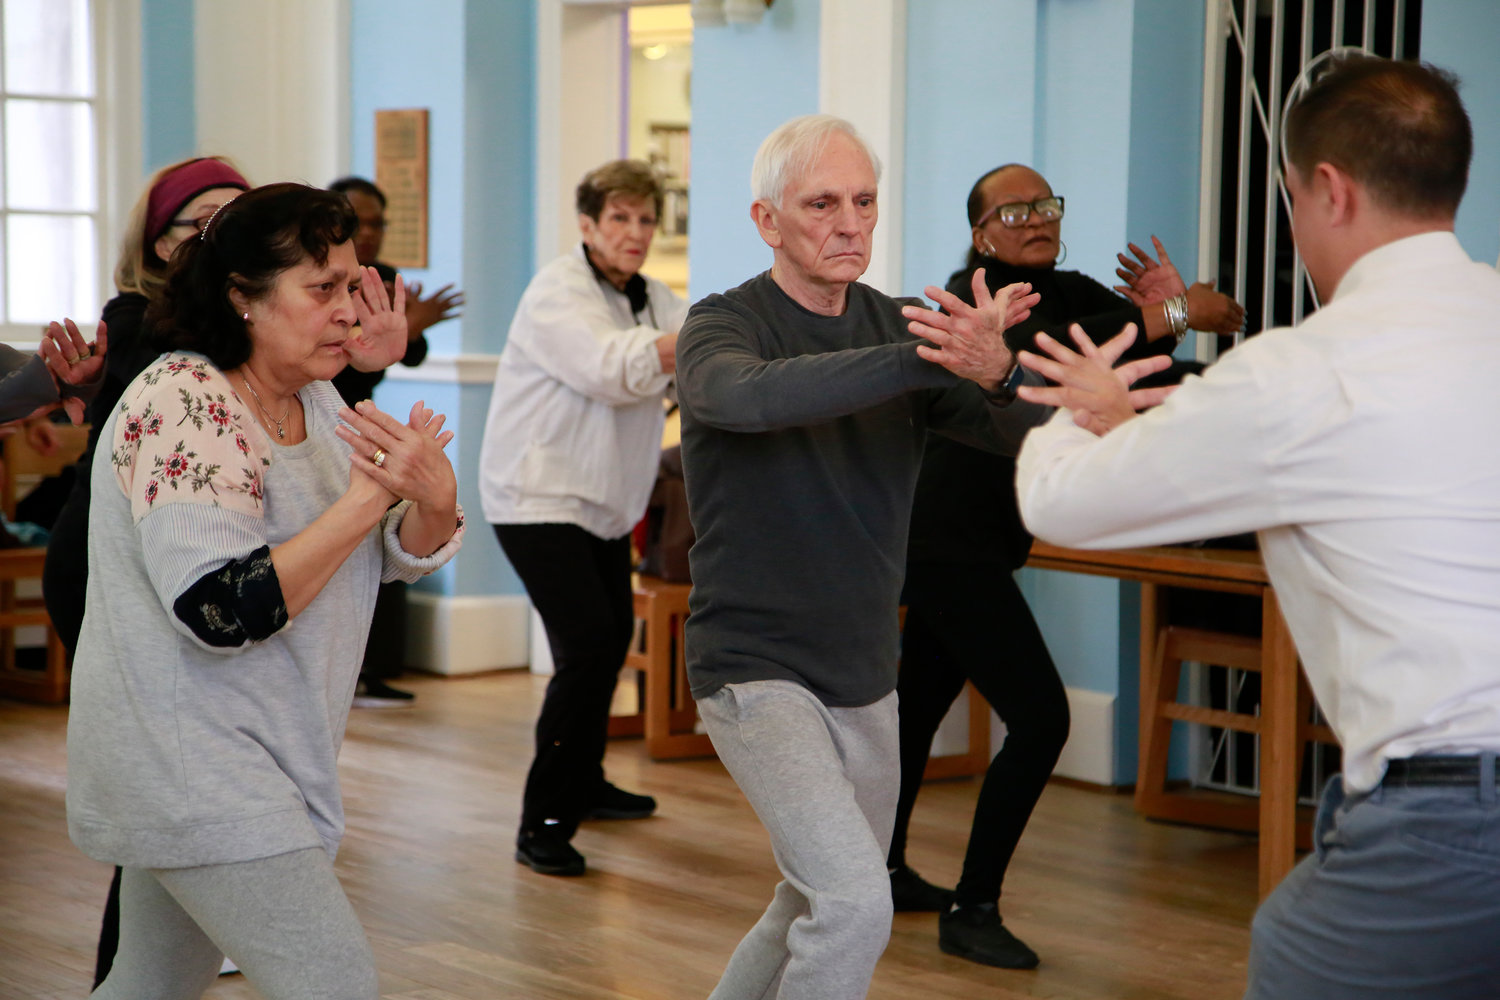 Tai chi students, Olga Marrell, left, and George Perfetto follow instructions during the ward off movement.